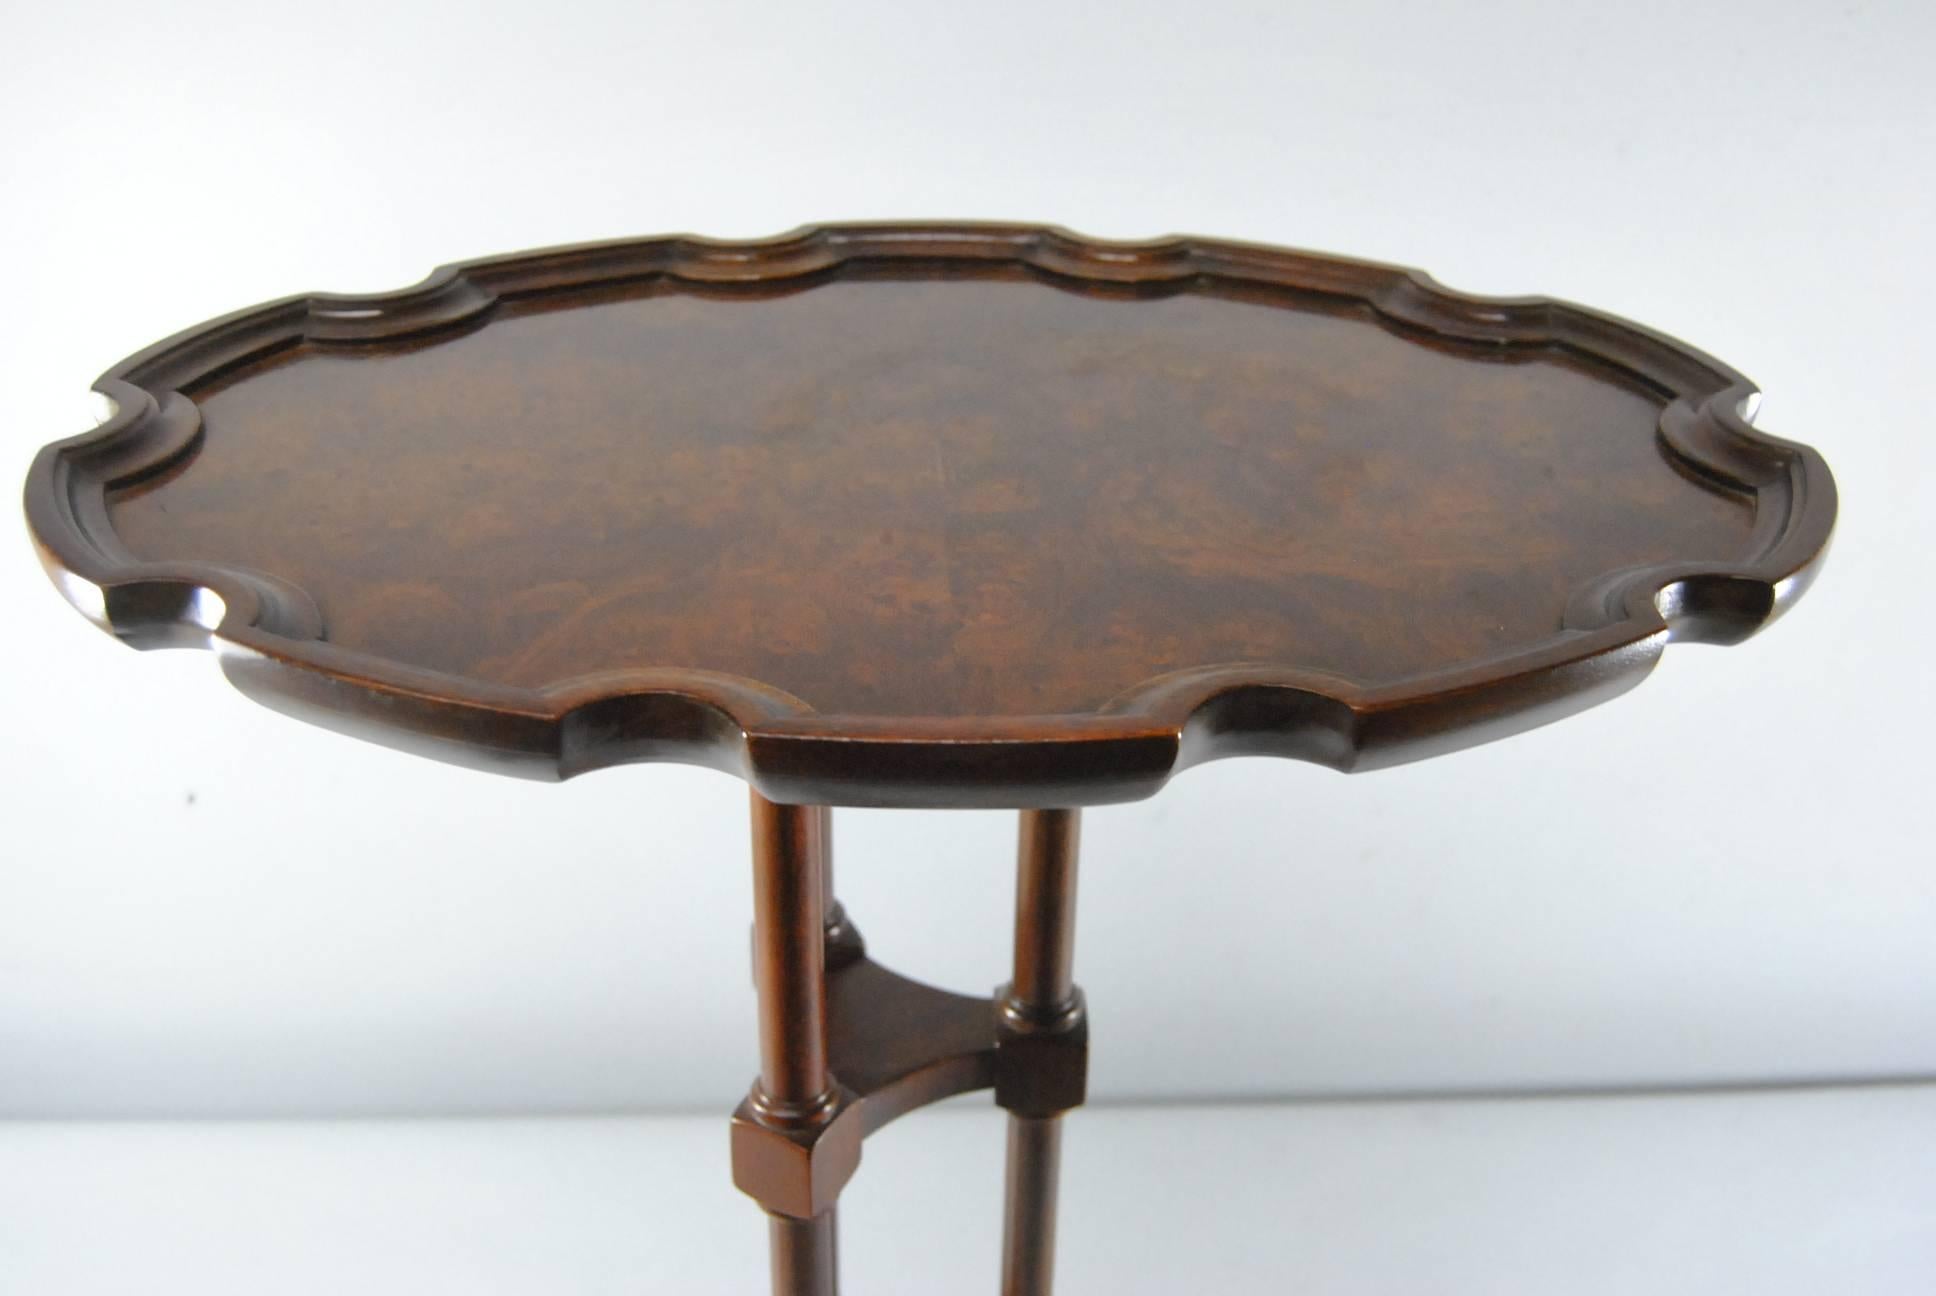 A great small-scale accent table by Baker Furniture as part of their Historic Charleston collection. The table features a stunning burl wood top with pie crust edge. Top is supported by three legs attached to triangular base with three paw feet.